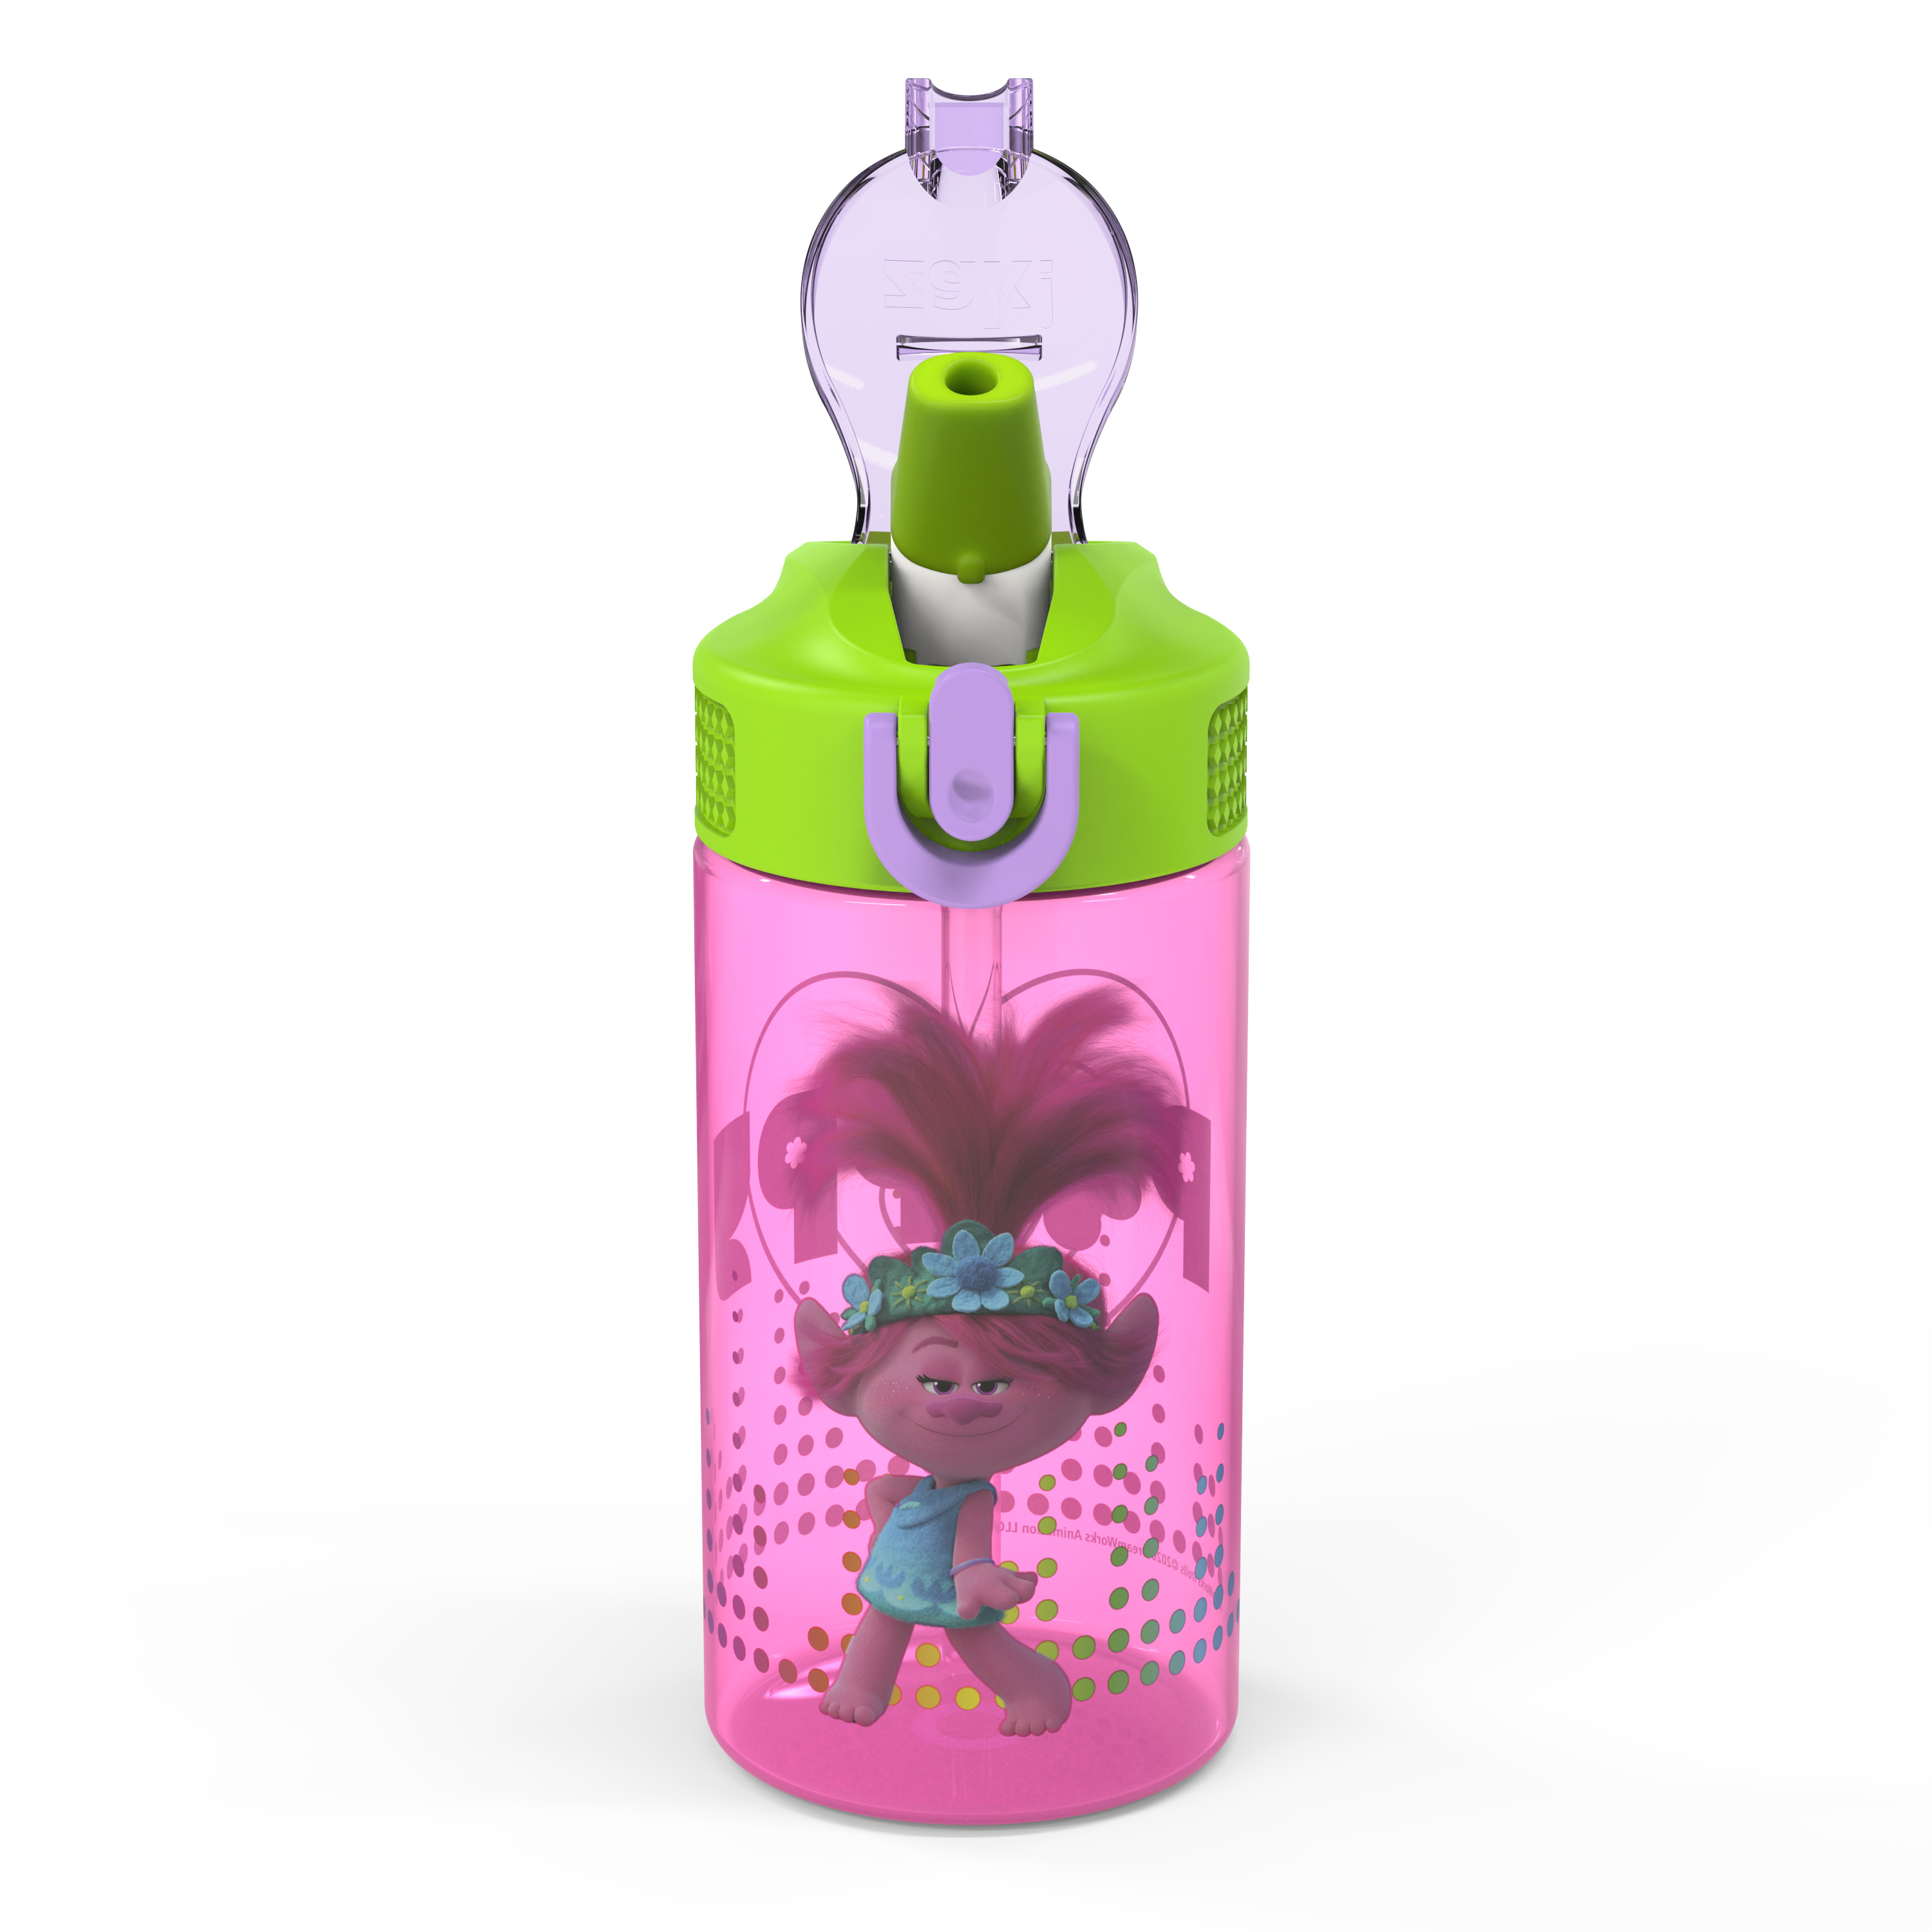 Trolls 2 Movie 16 ounce Reusable Plastic Water Bottle with Straw, Poppy, 2-piece set slideshow image 5